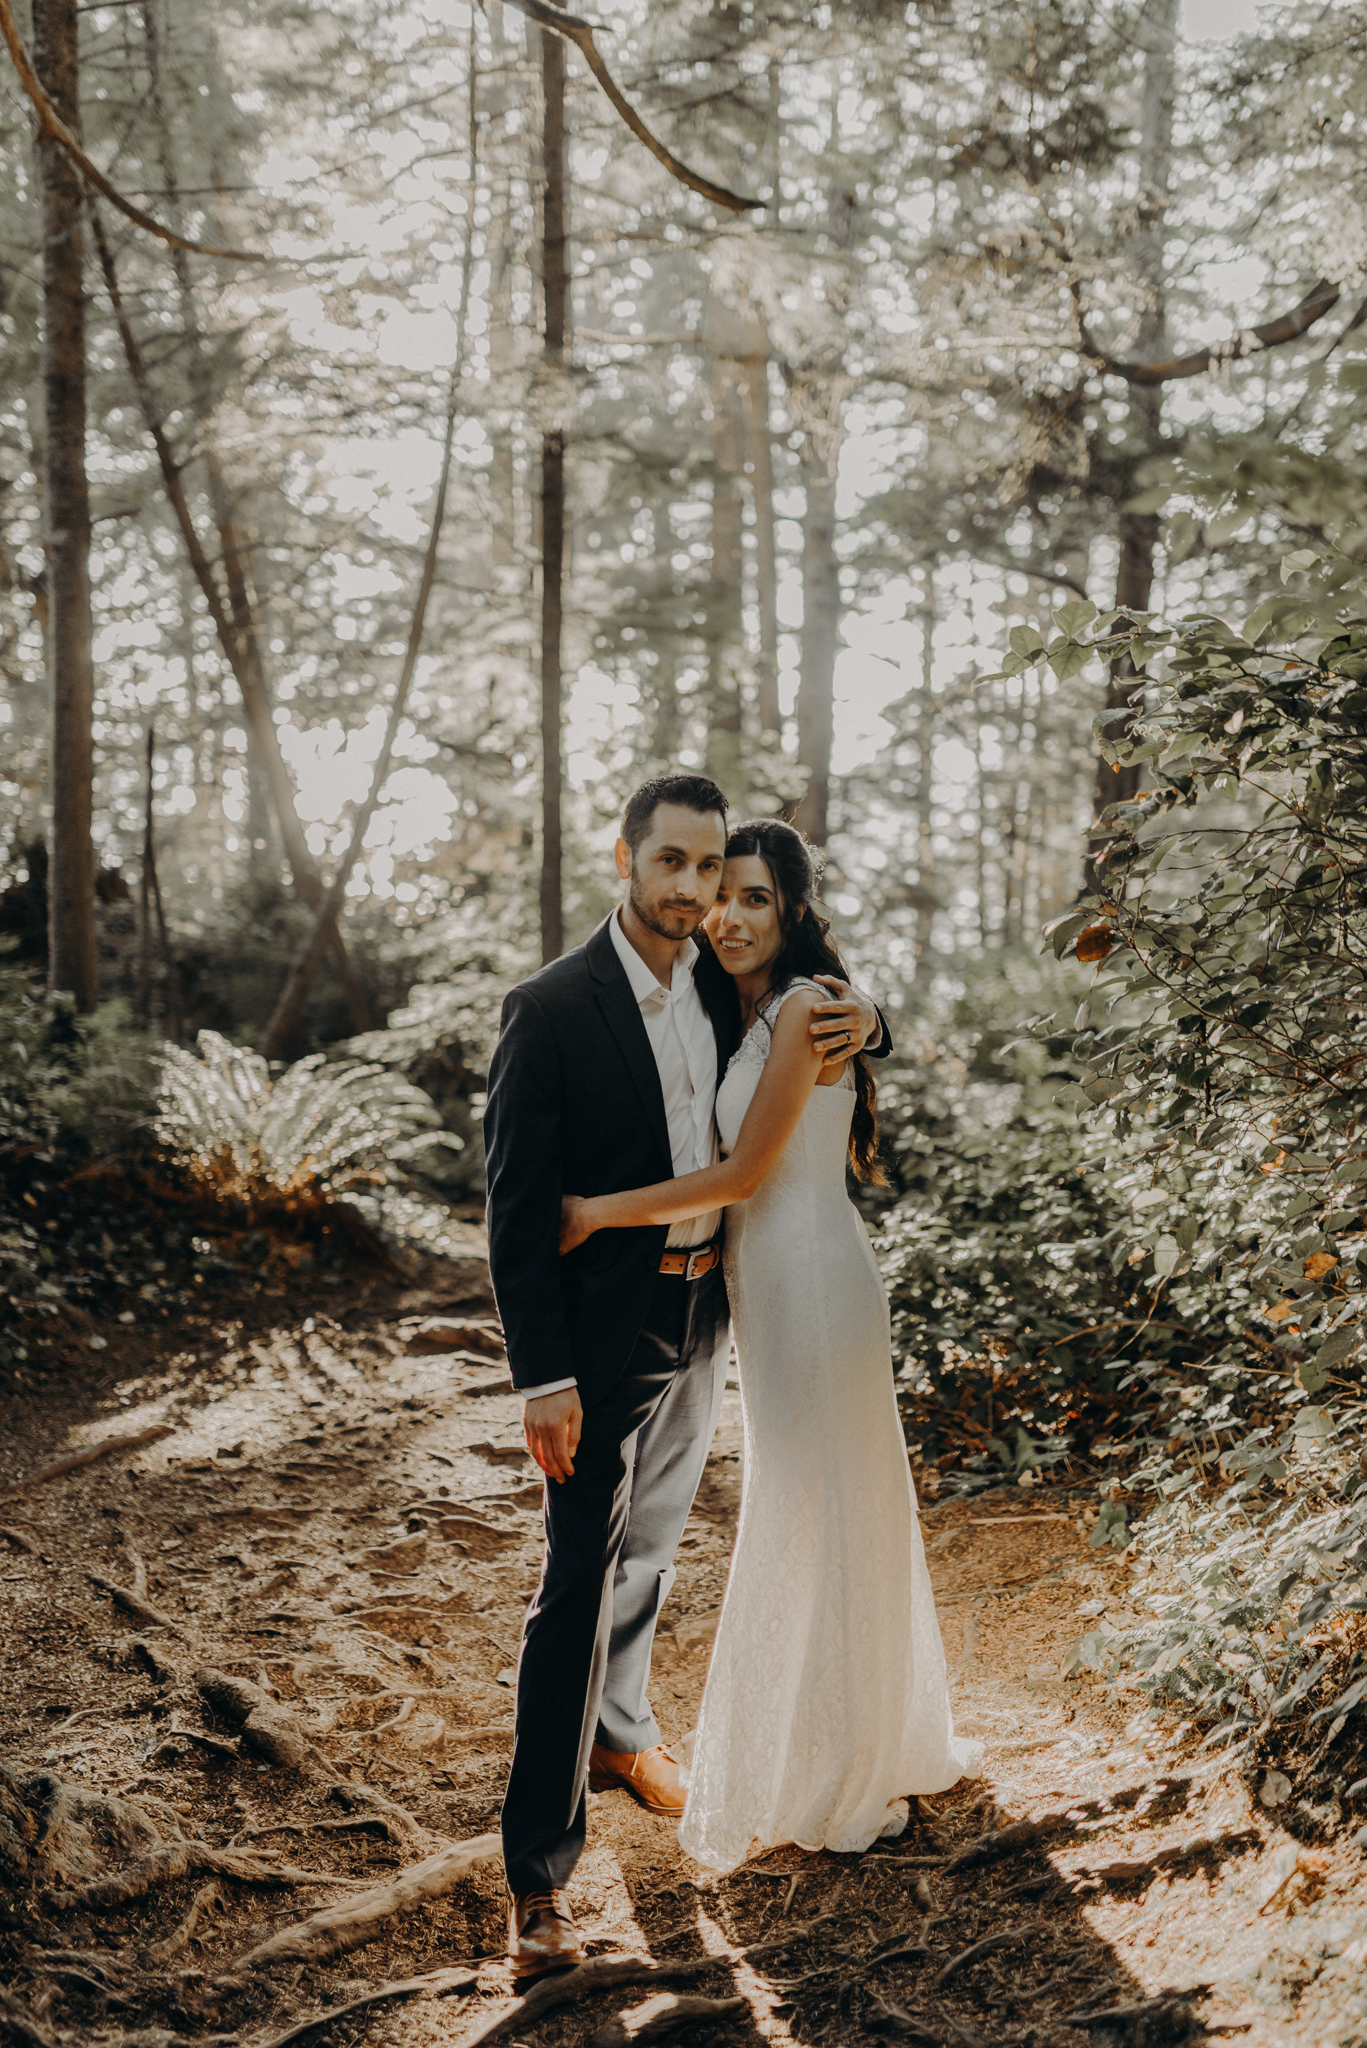 Isaiah + Taylor Photography - Cape Flattery Elopement, Olympia National Forest Wedding Photographer-120.jpg